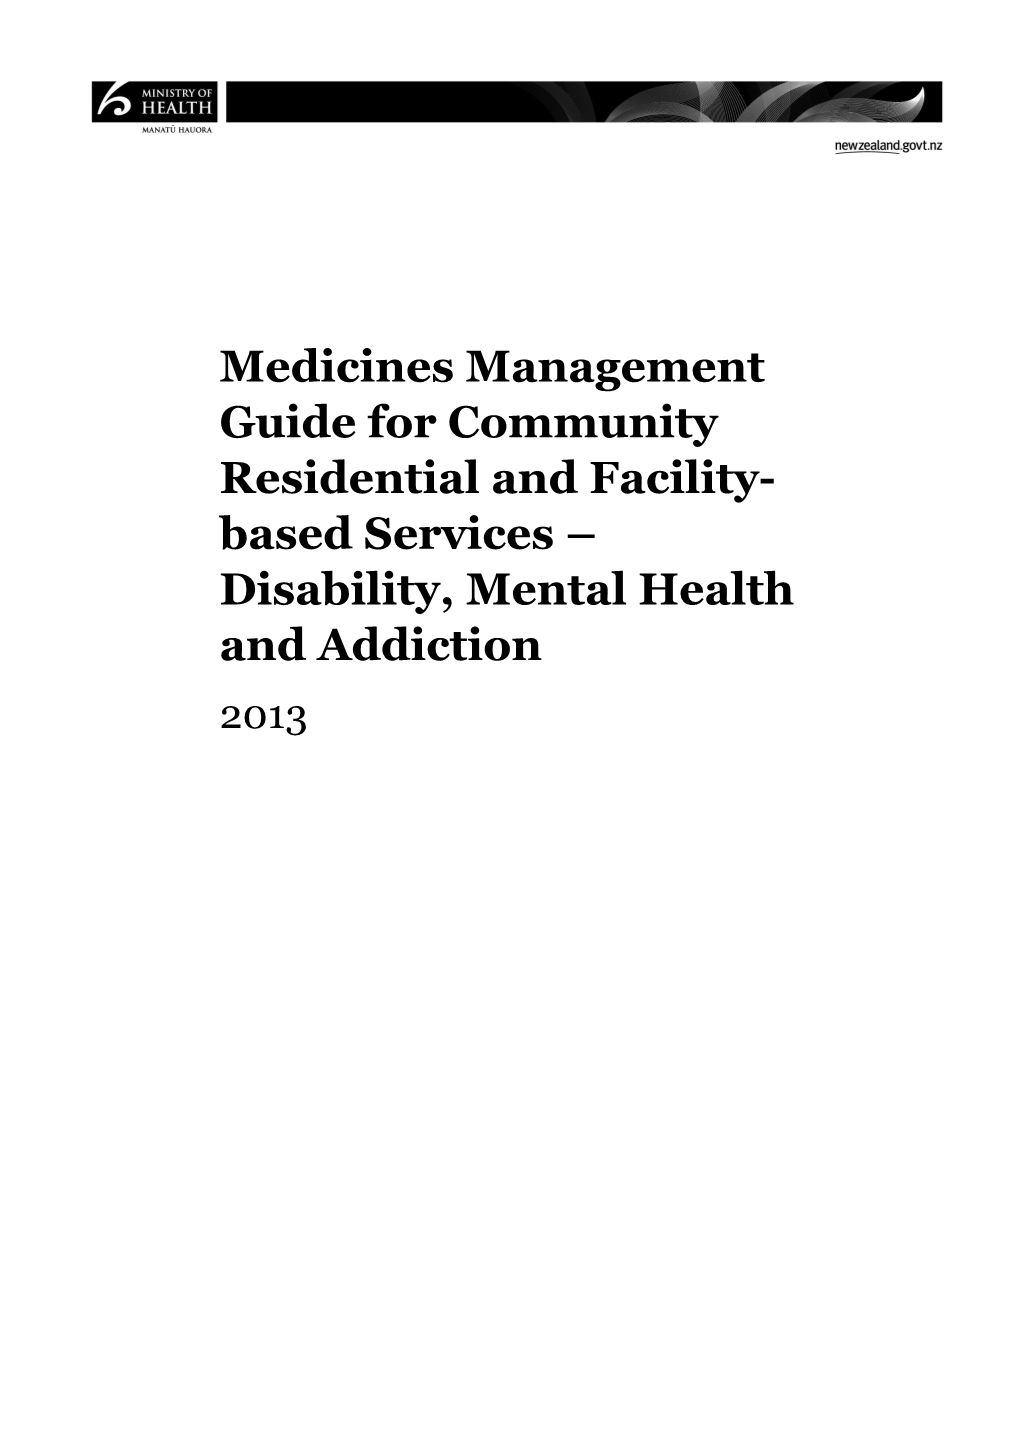 Medicines Management Guide for Community Residential and Facility-Based Services Disability